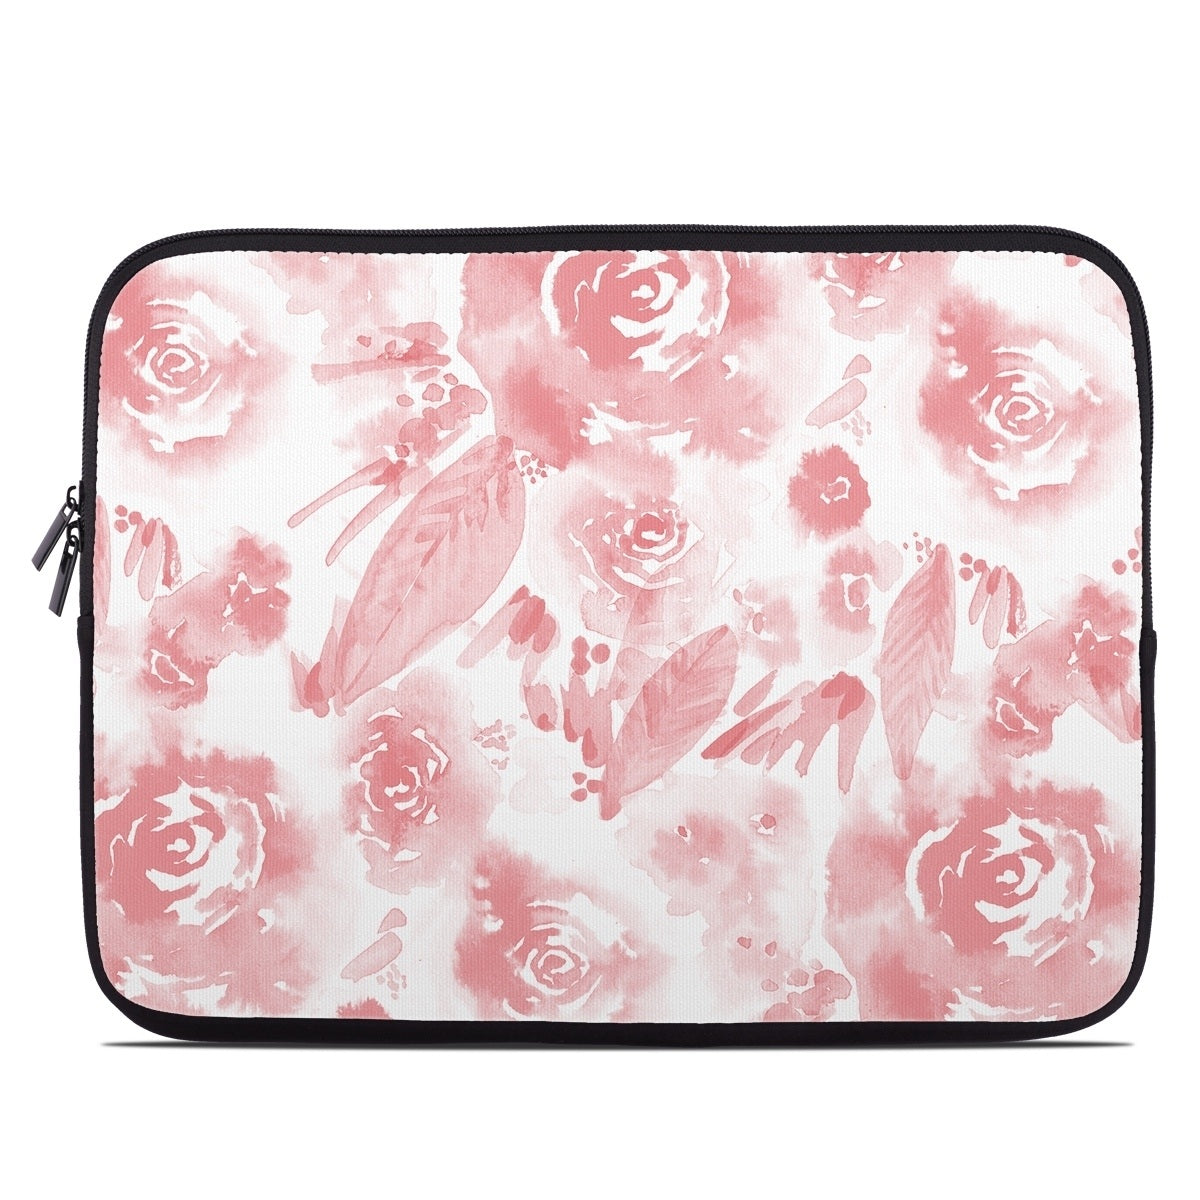 Washed Out Rose - Laptop Sleeve